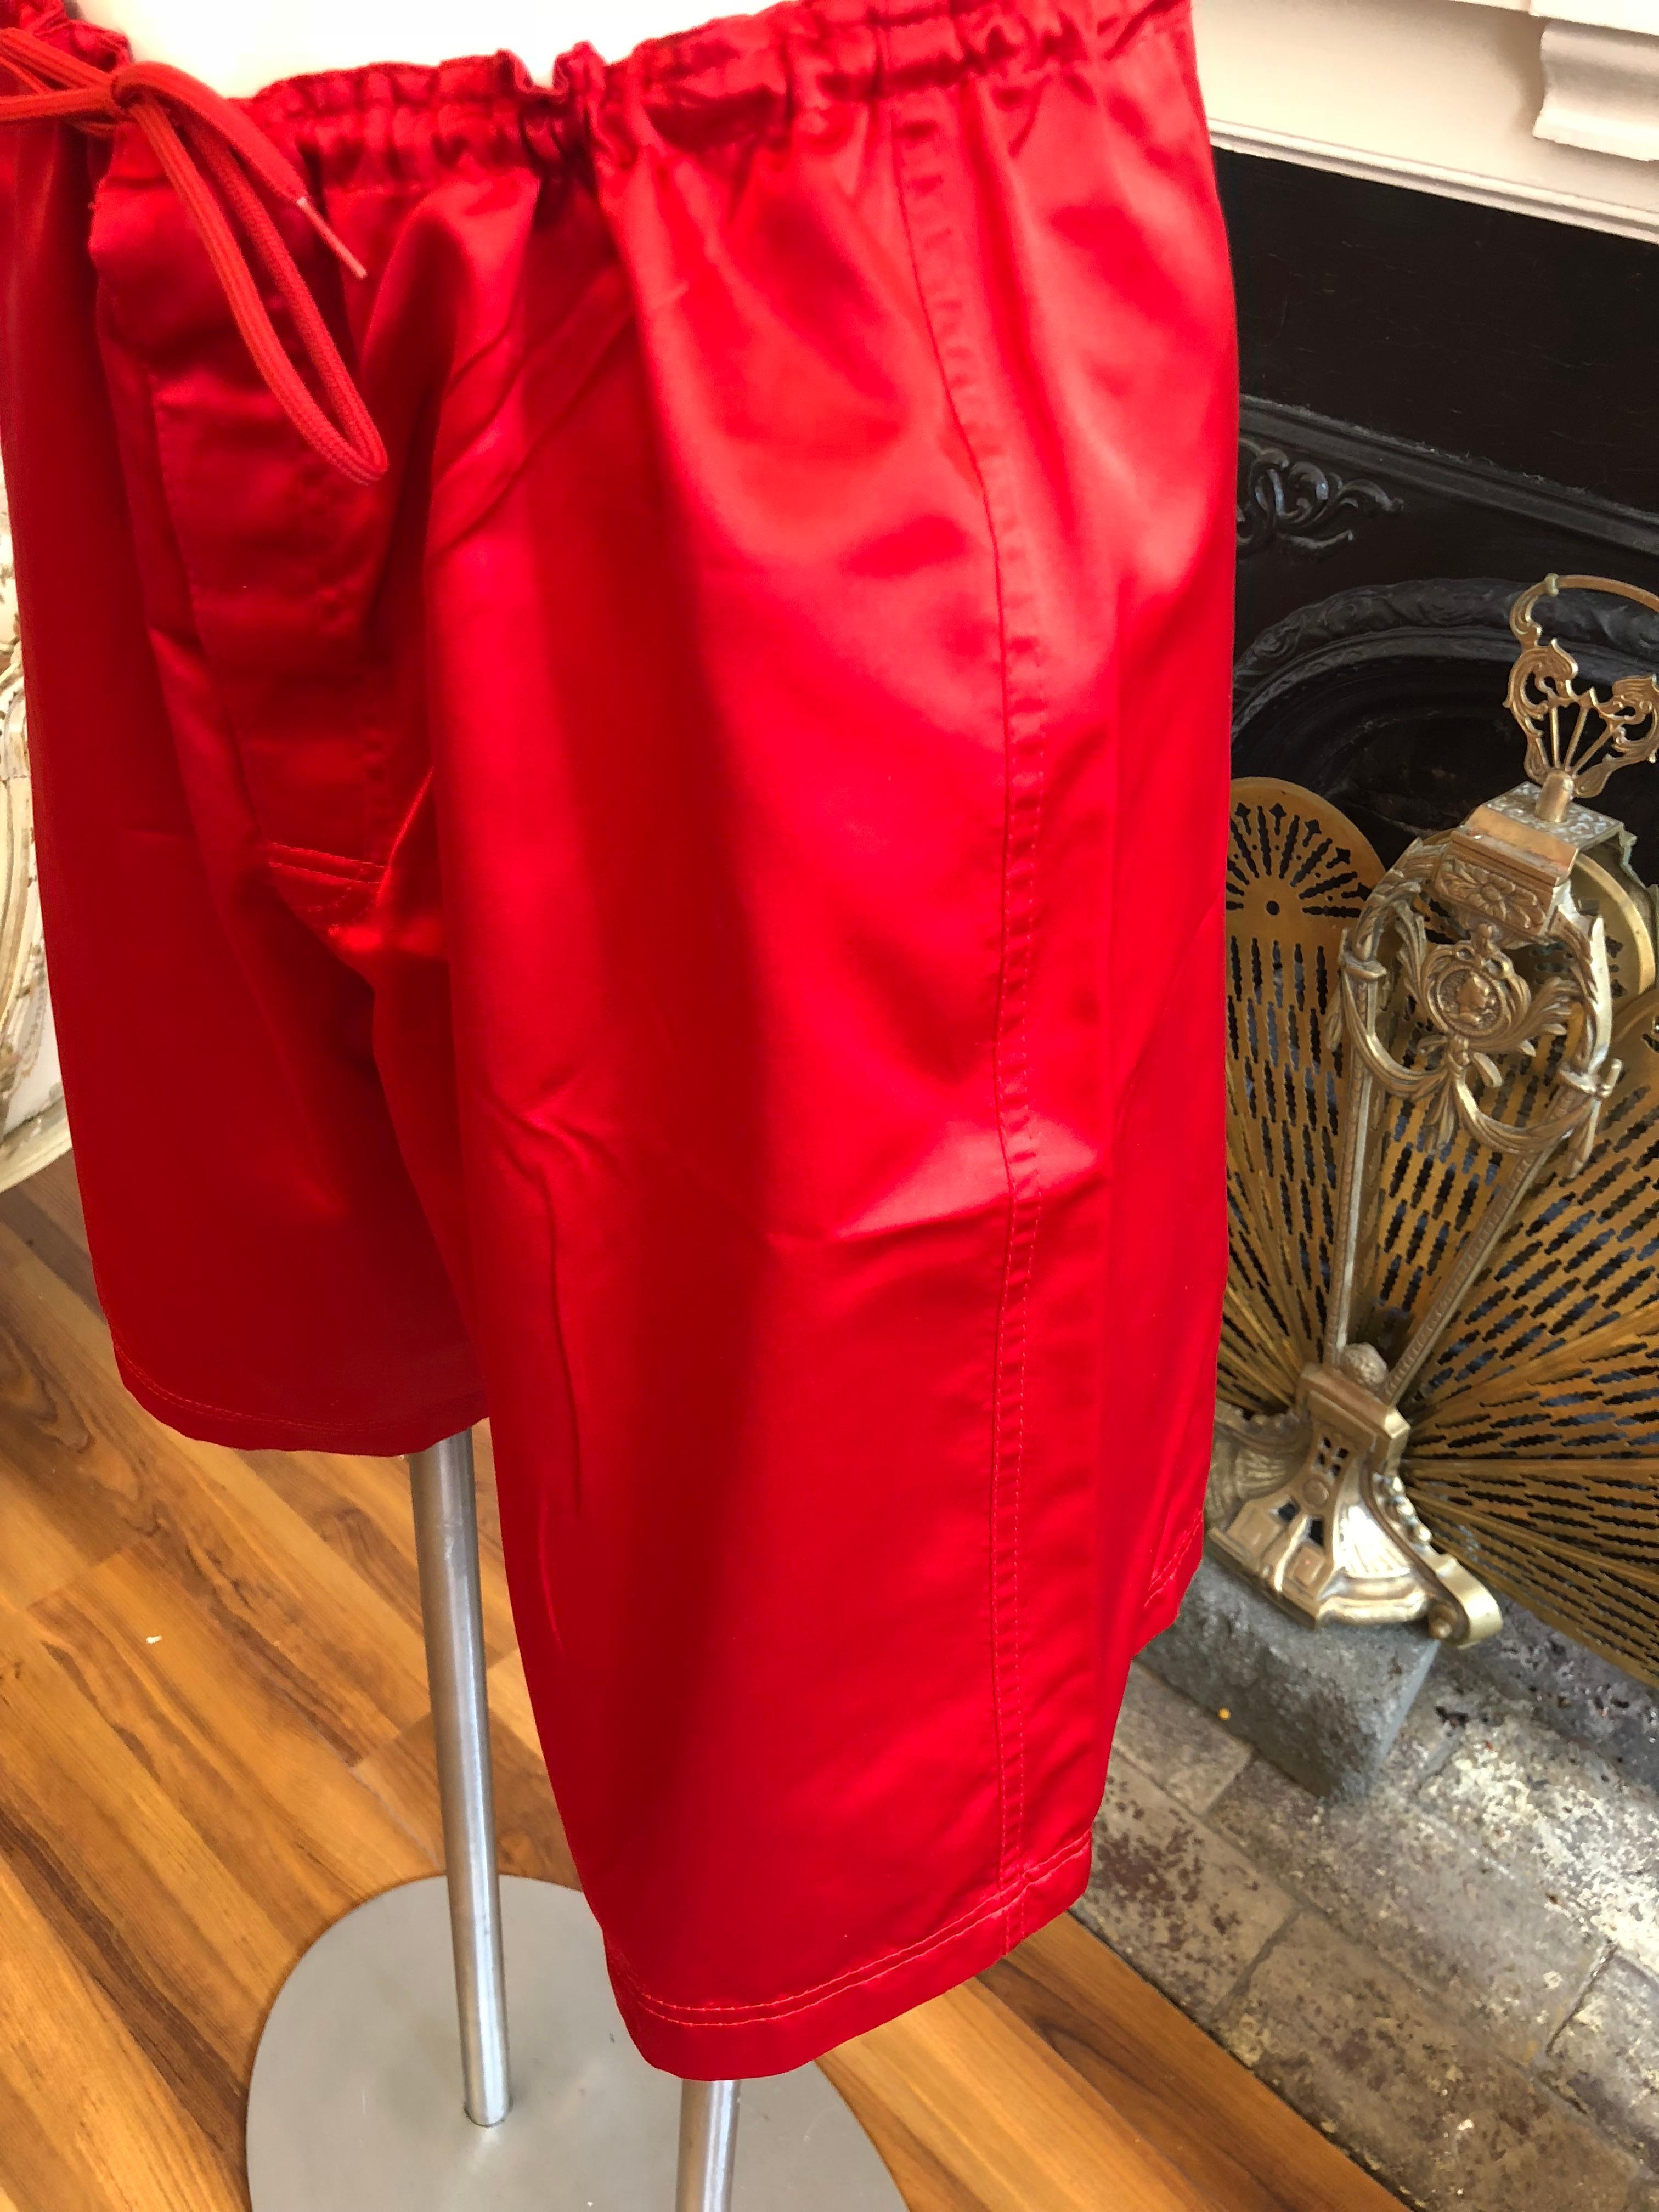 Pair it with a short leather jacket and a pair of booties and you are ready to go! Closure is by a Velcro strip and there is a drawstring waist which can be adjusted.